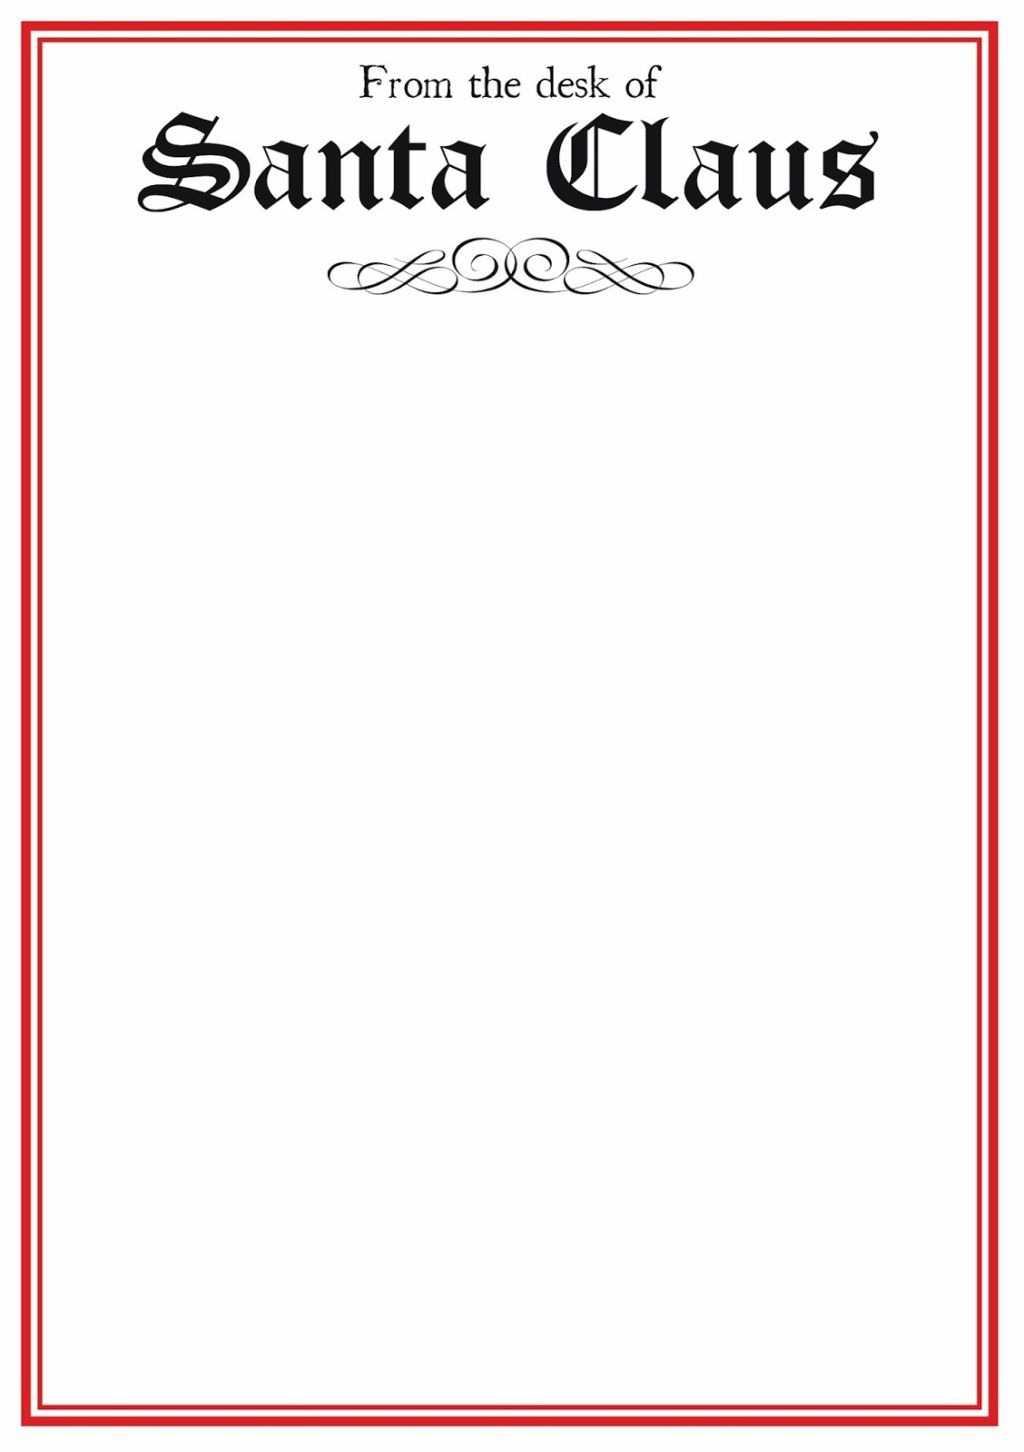 Letter From Santa Template – Bbq Grill Recipes For Letter From Santa Template Word